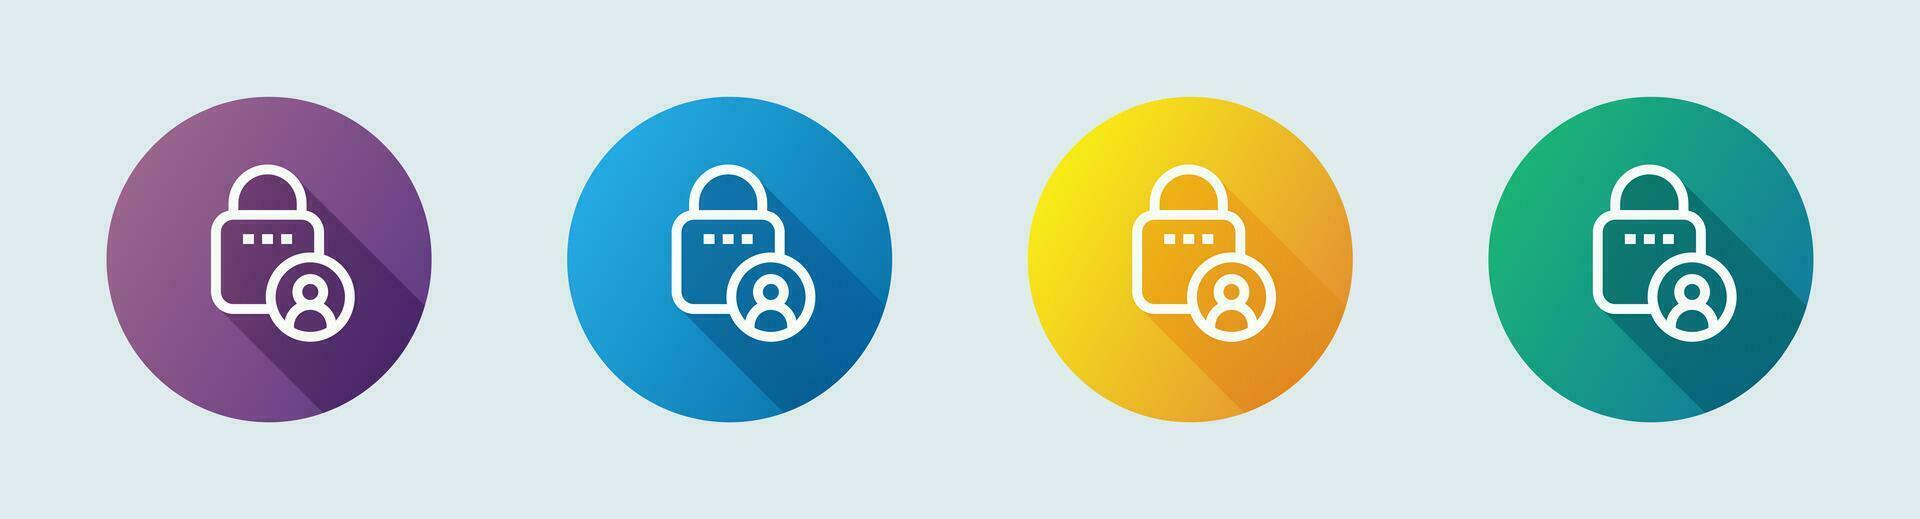 Access line icon in flat design style. Protection signs vector illustration.